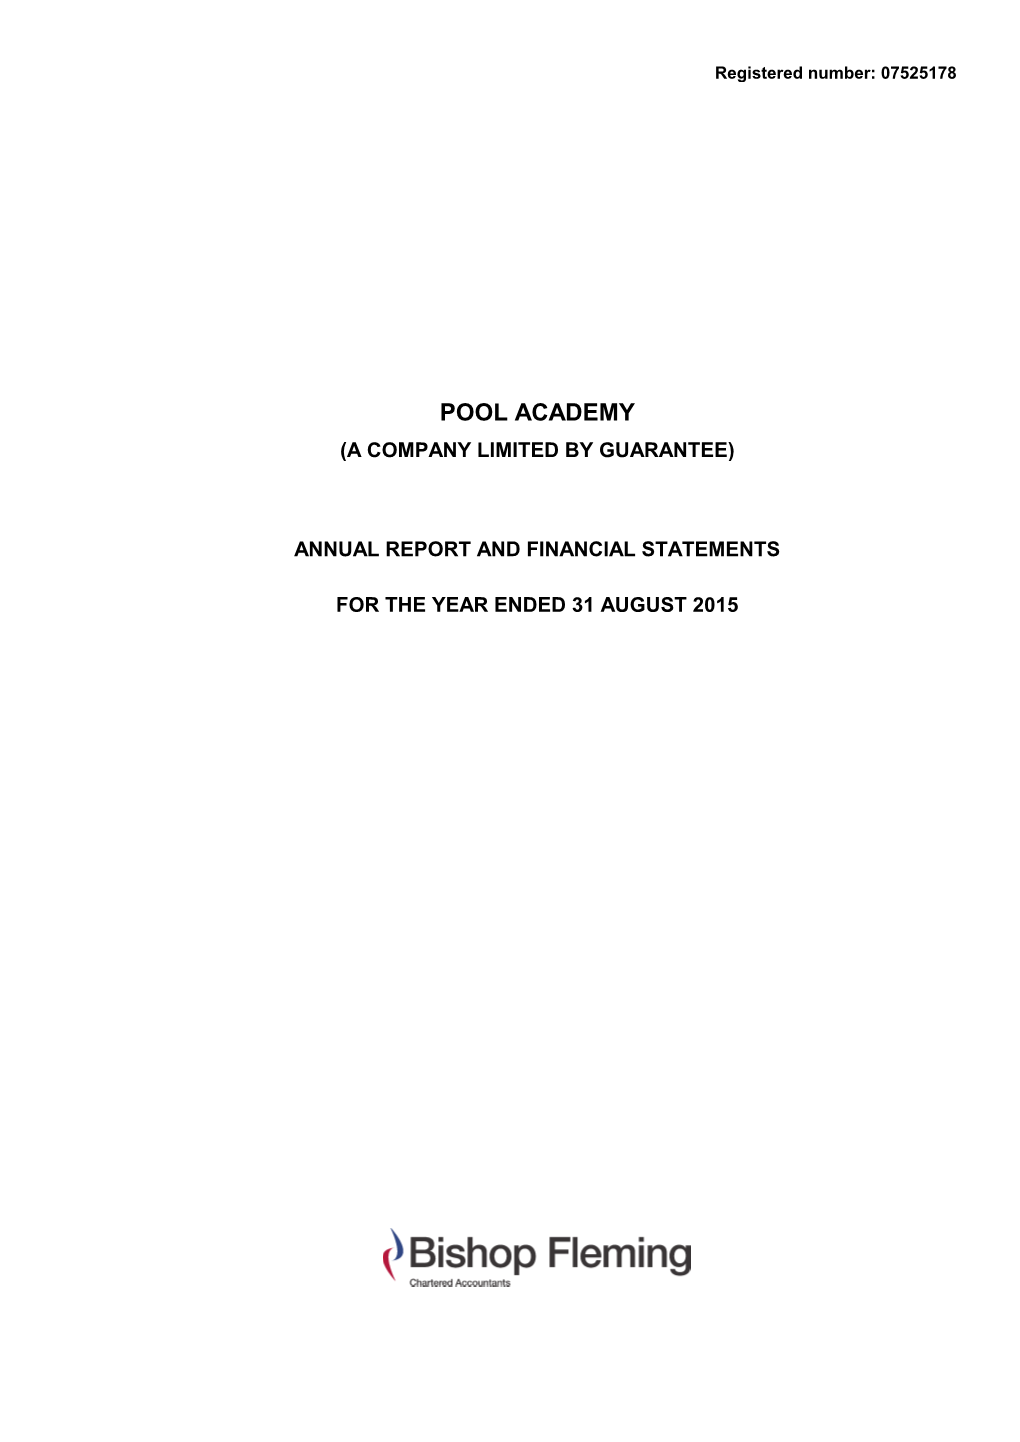 Pool Academy (A Company Limited by Guarantee)